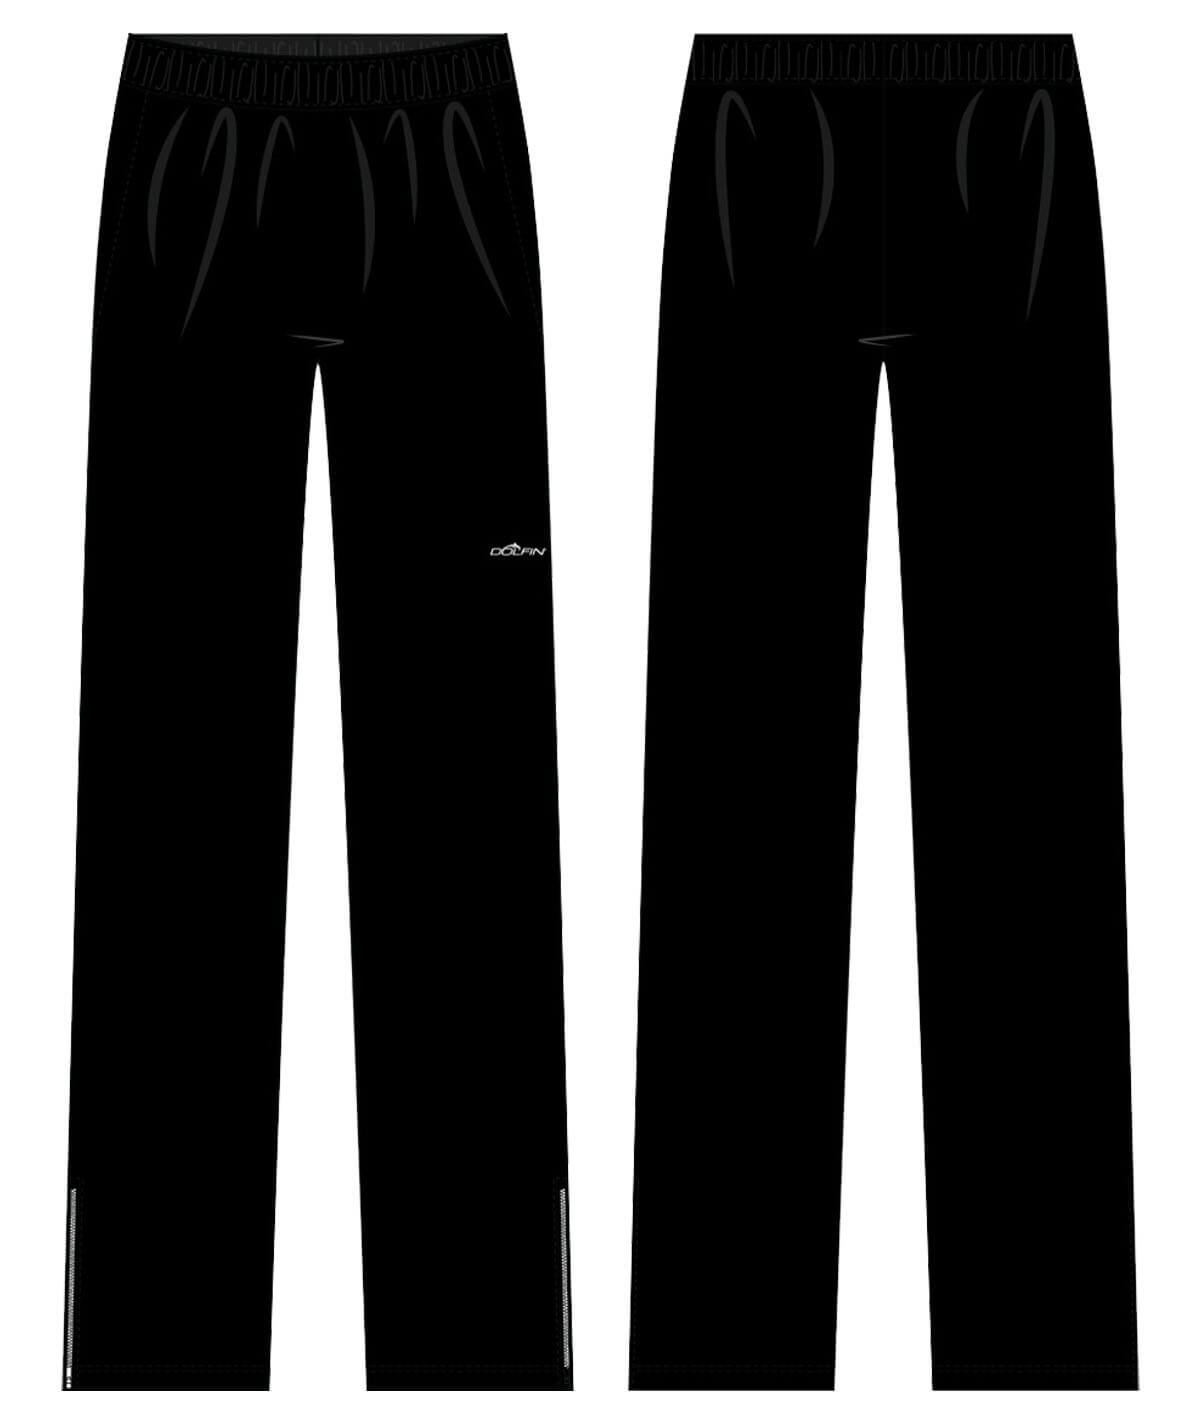 Fit Kit - Team Gear Male Warm Up Pant